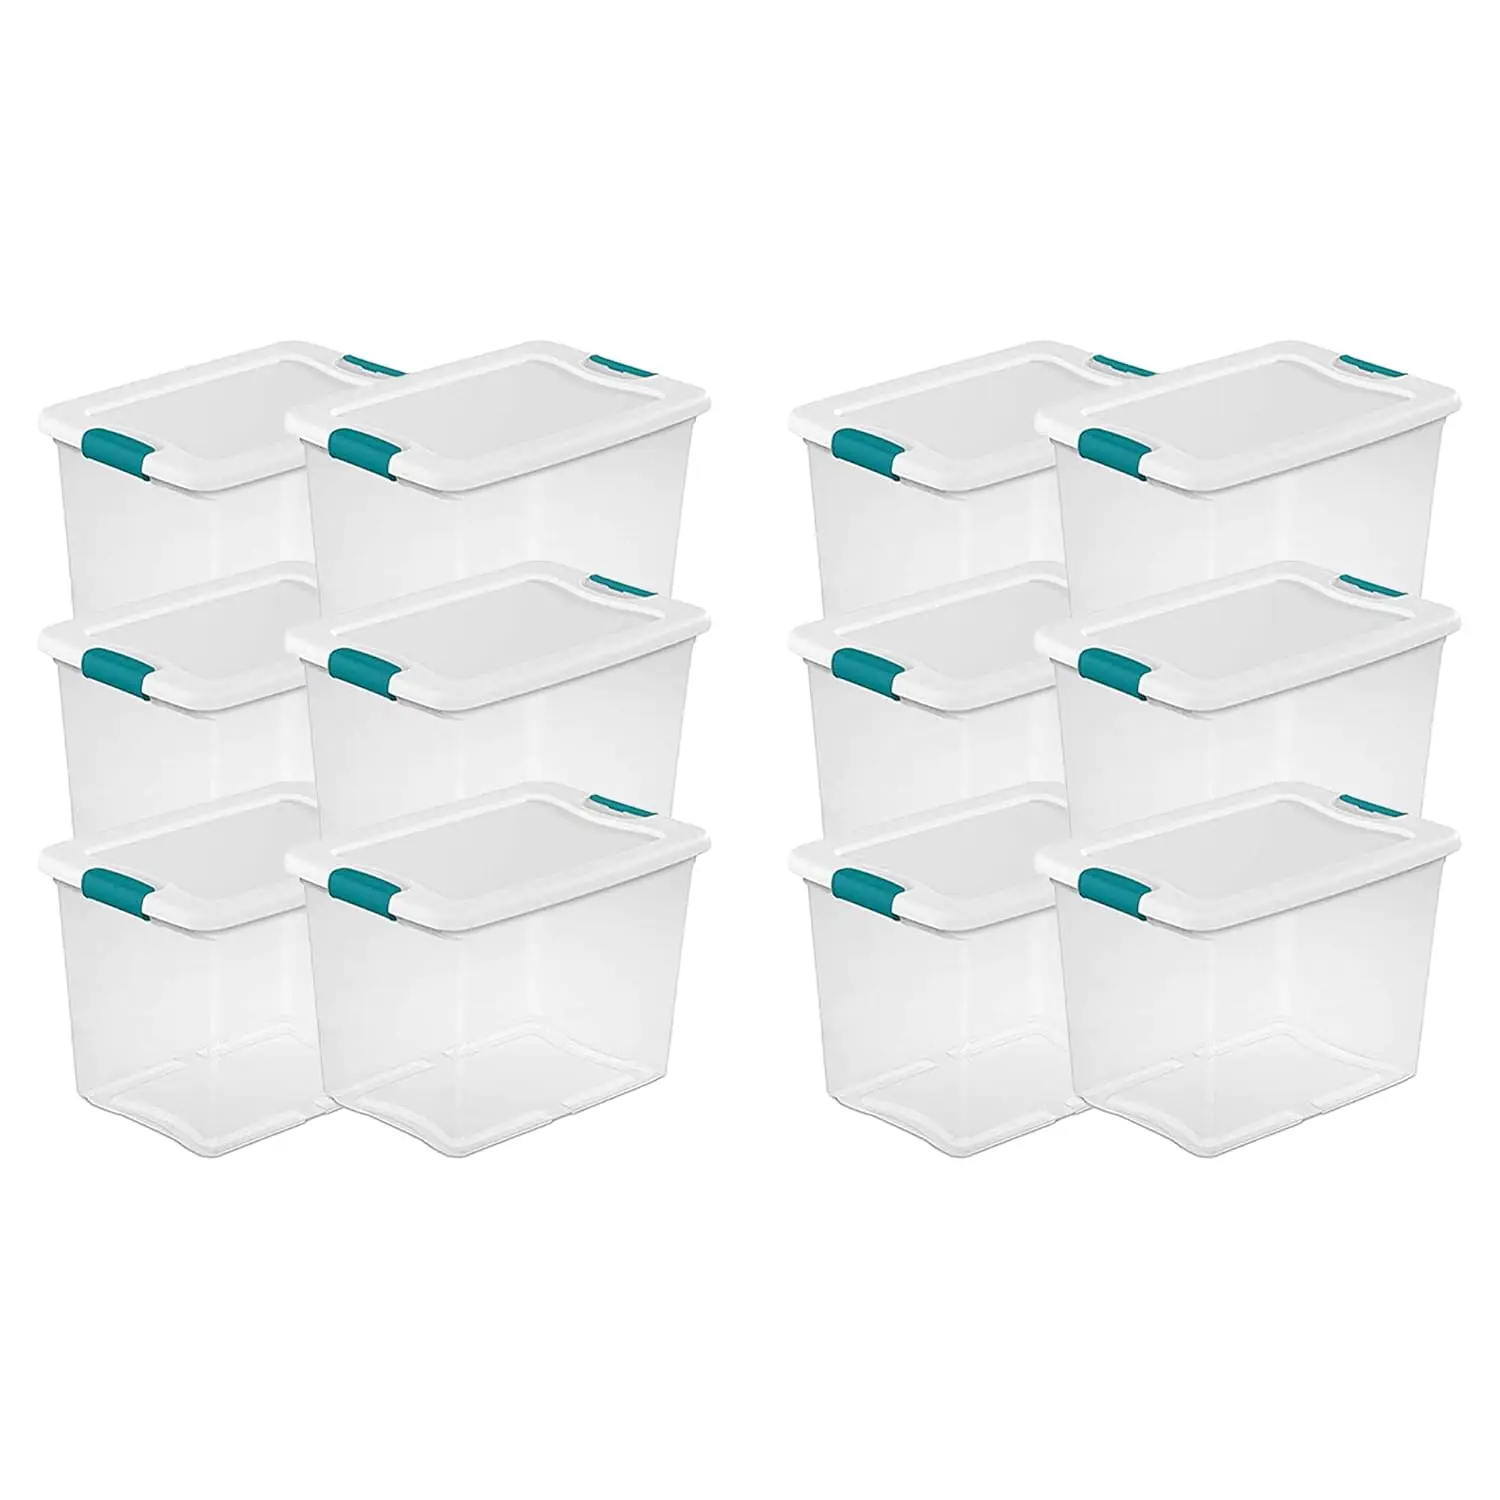 

Sterilite 25 Qt Latching Storage Box, Stackable Bin with Latch Lid, Plastic Container to Organize Closet Shelf, Clear with White